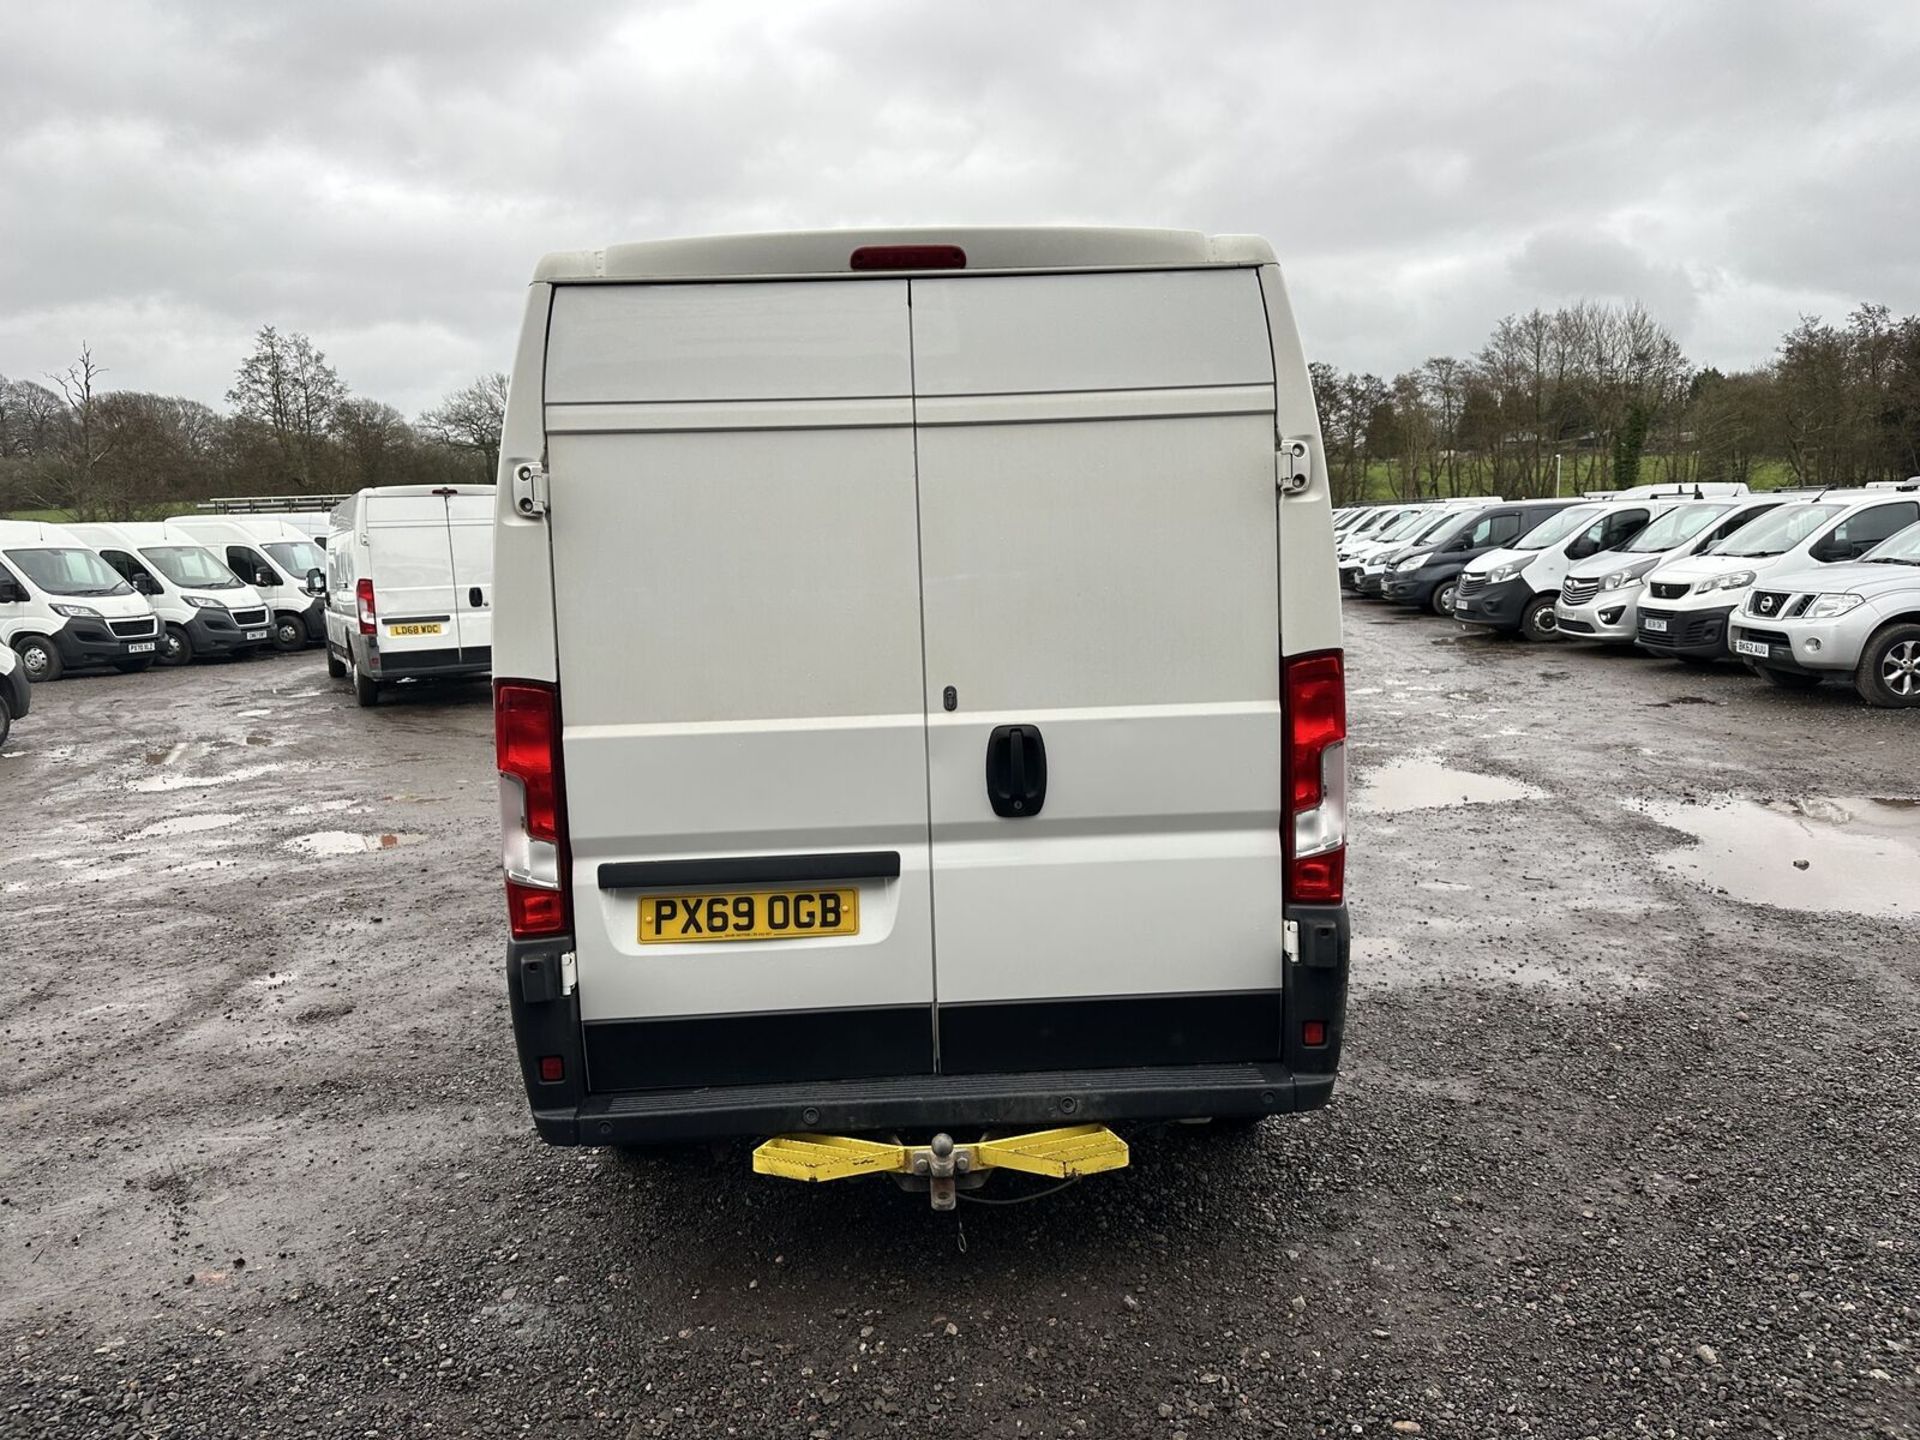 69 PLATE PEUGEOT BOXER: BLUE HDI POWER, READY FOR DUTY - Image 3 of 19